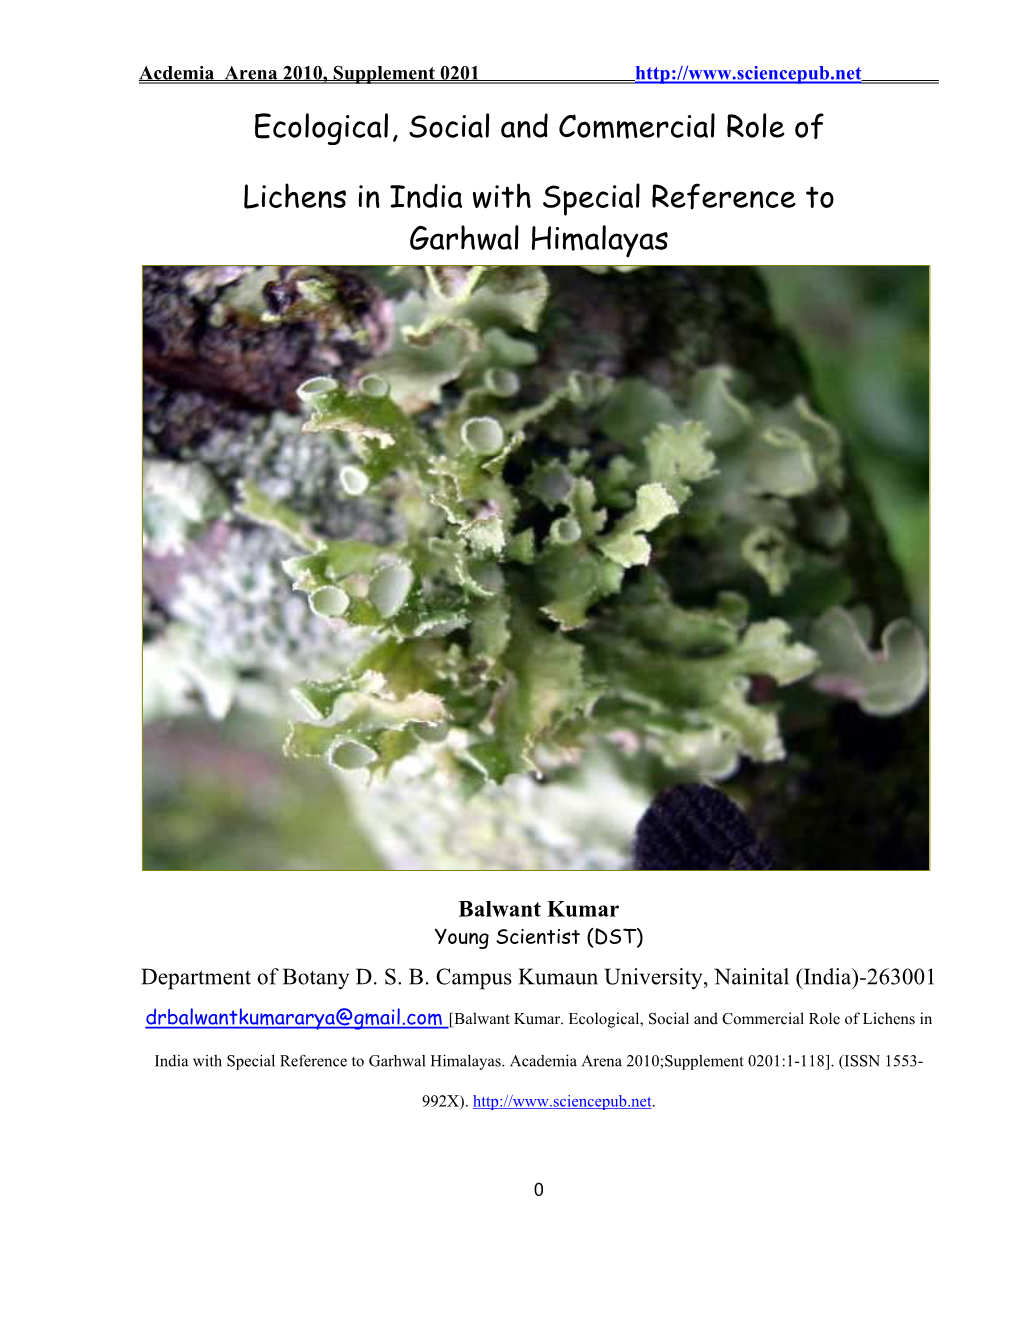 Ecological, Social and Commercial Role of Lichens in India With